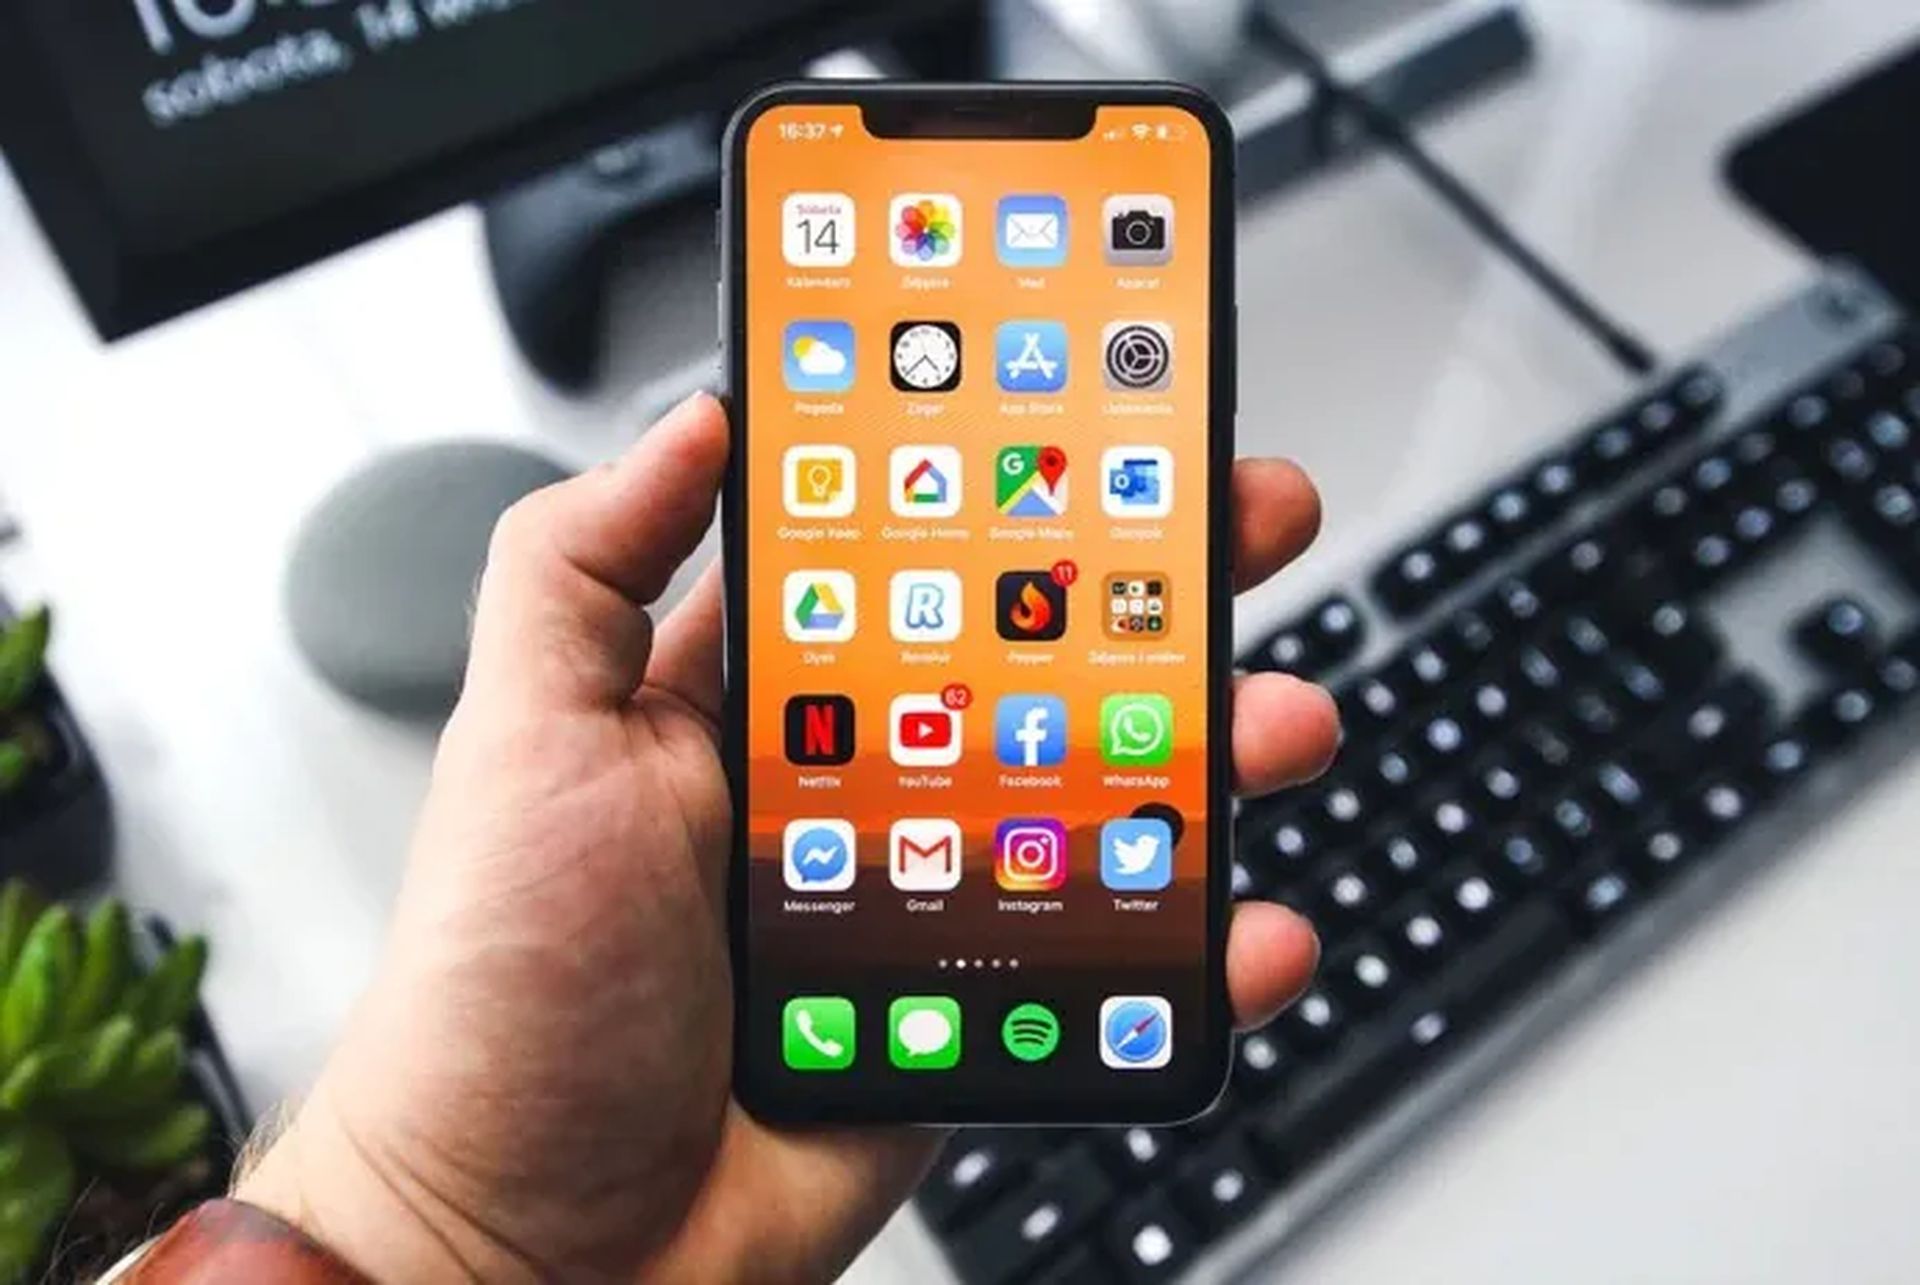 In this article, we are going to be covering No location found iPhone meaning and how to fix it, so you can use your device without any problems.